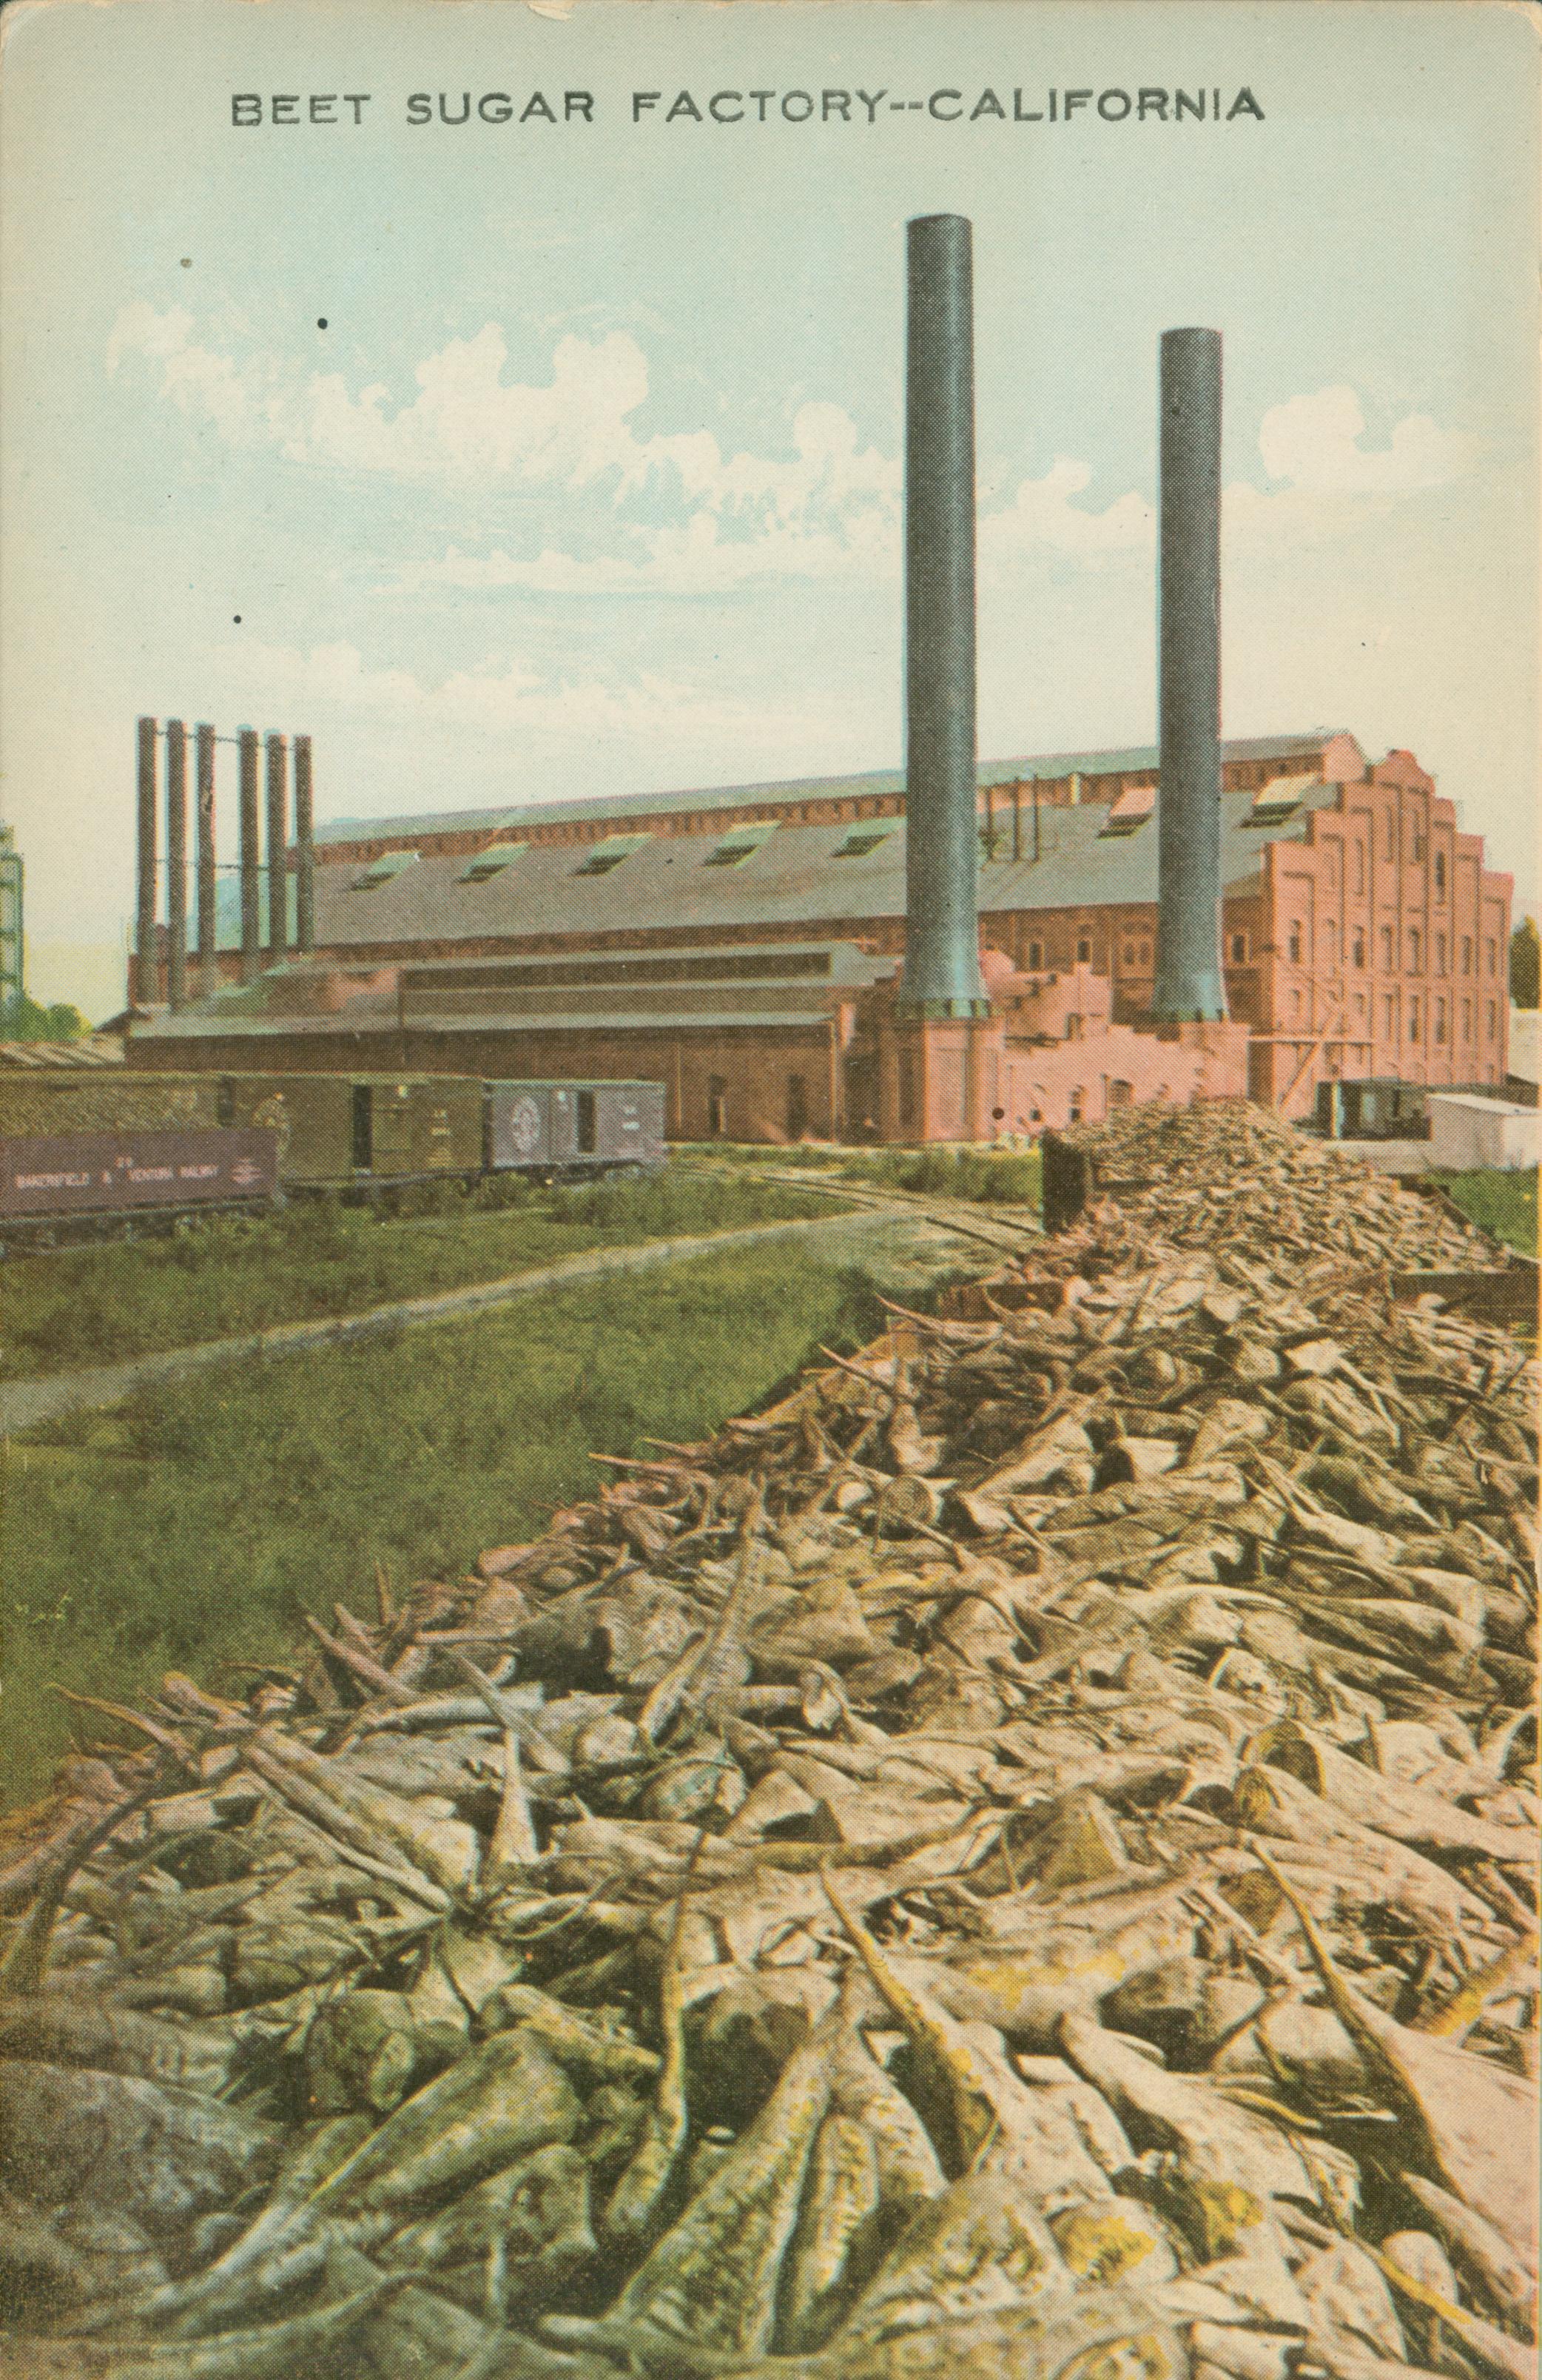 Shows the exterior of the Oxnard Sugar Factory, with several mounds of sugar beets outside of it